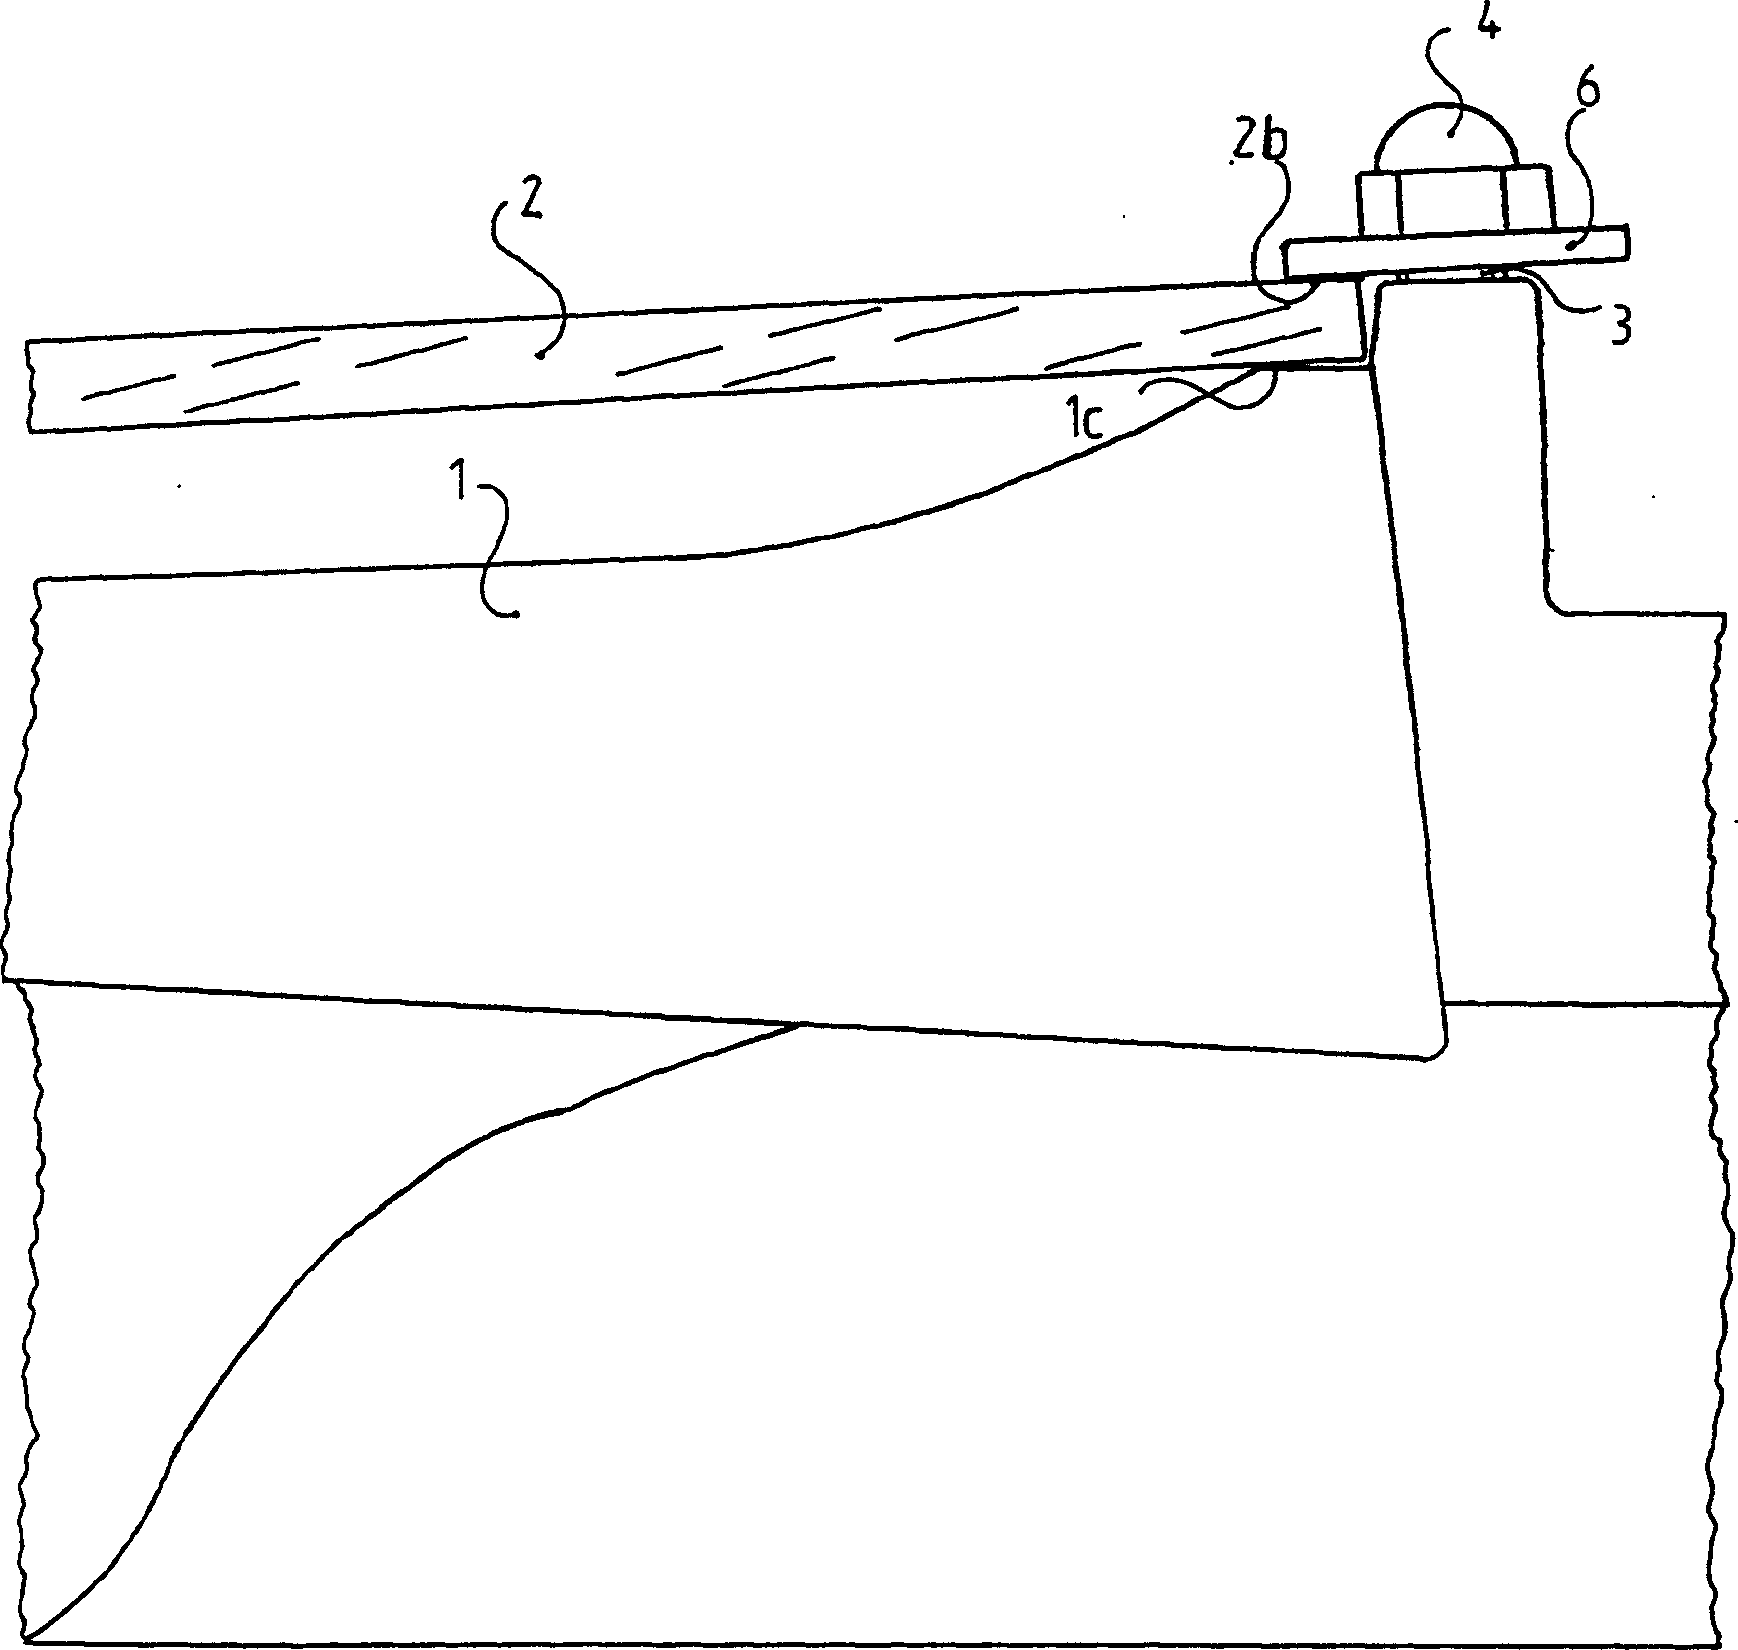 Method for integrated covering single-pitch roof by using photocell board and large tile forming covering material